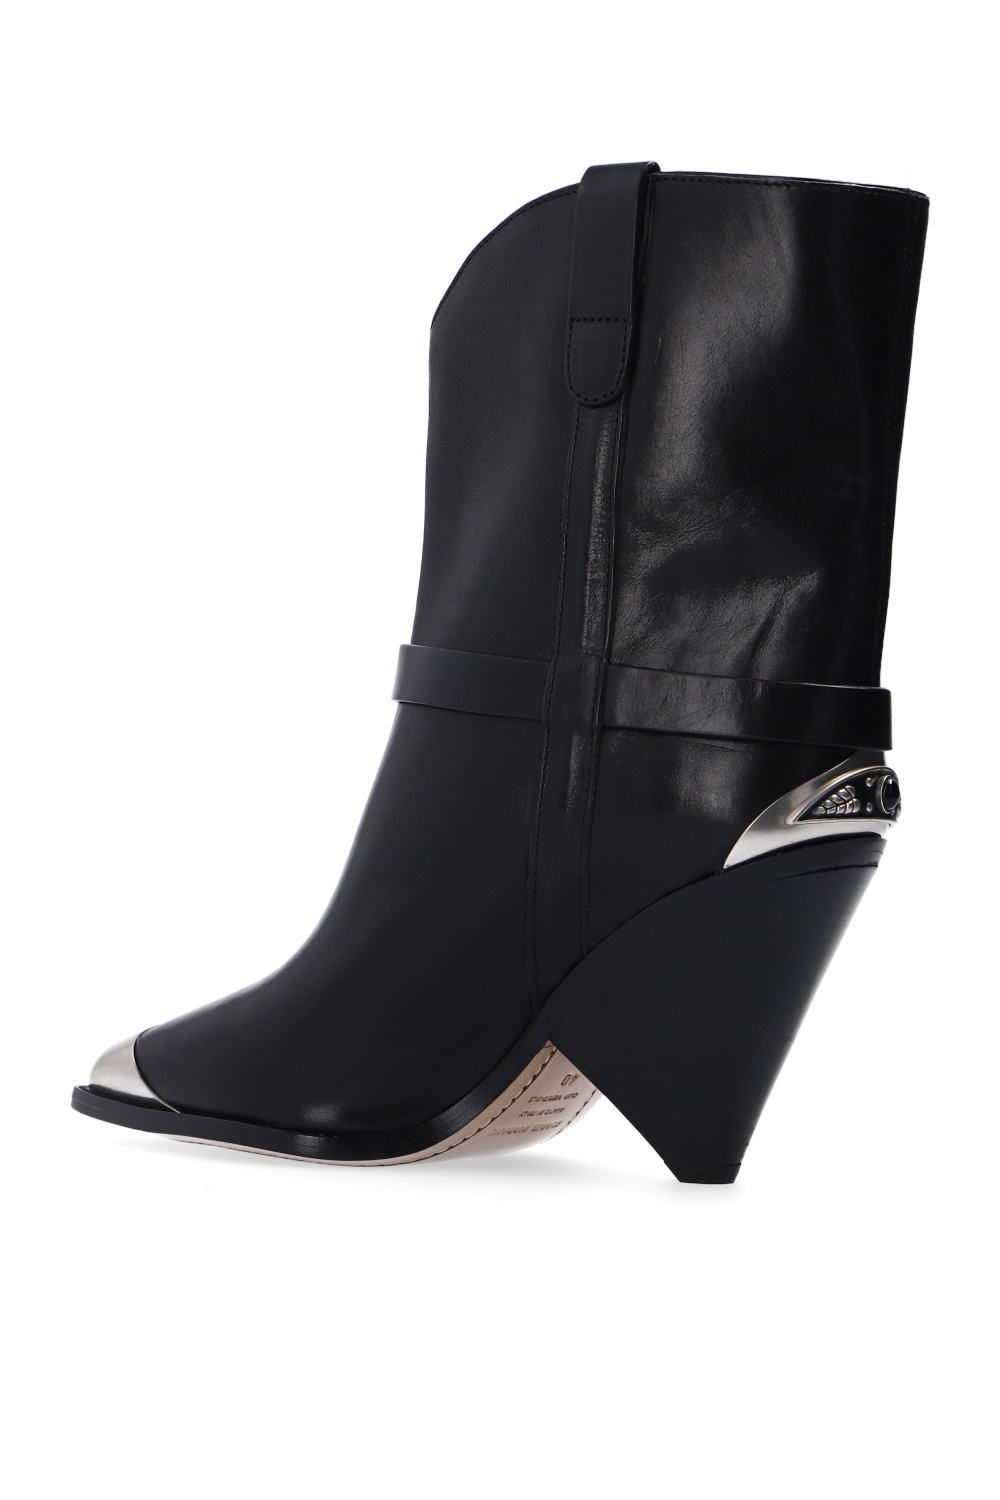 Isabel Marant ‘Lamsy’ heeled ankle Gifts boots